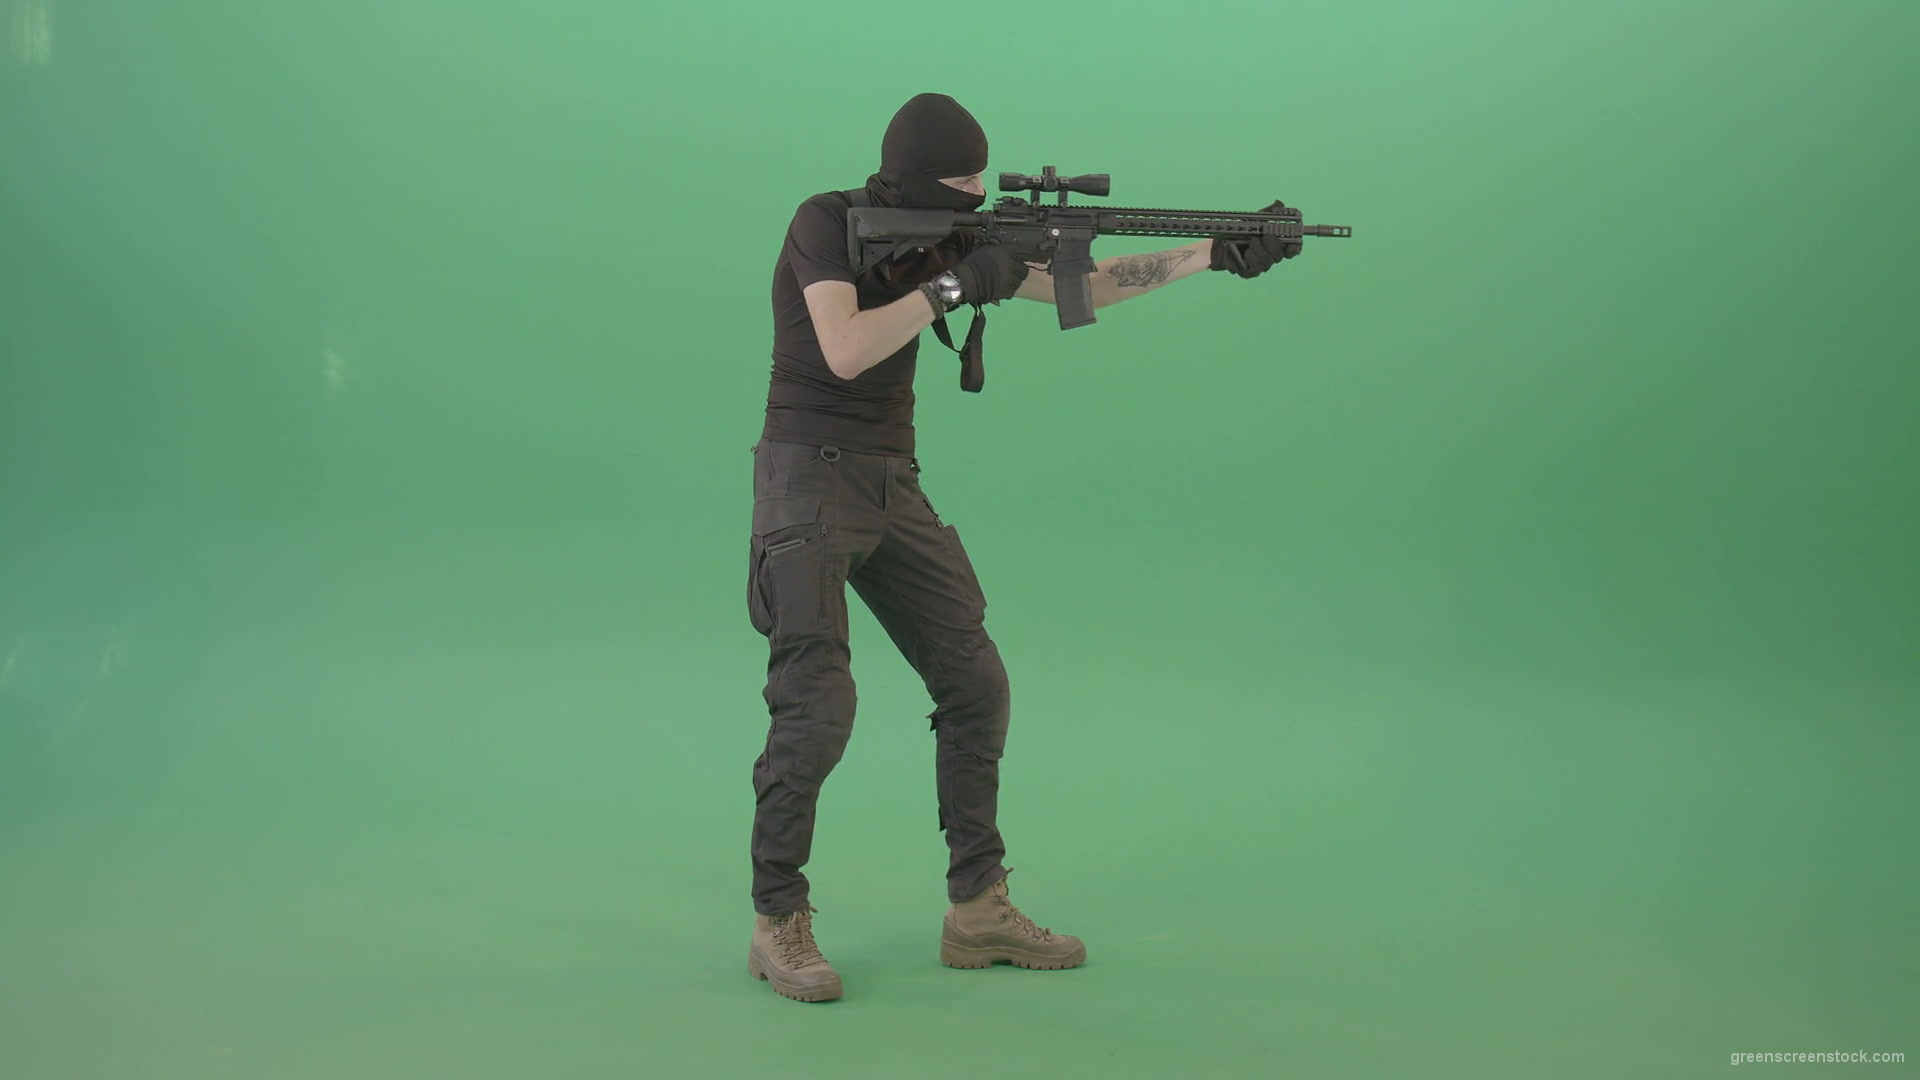 Army-soldier-shooting-with-gun-on-green-screen-4K-Video-Clip-1920_007 Green Screen Stock